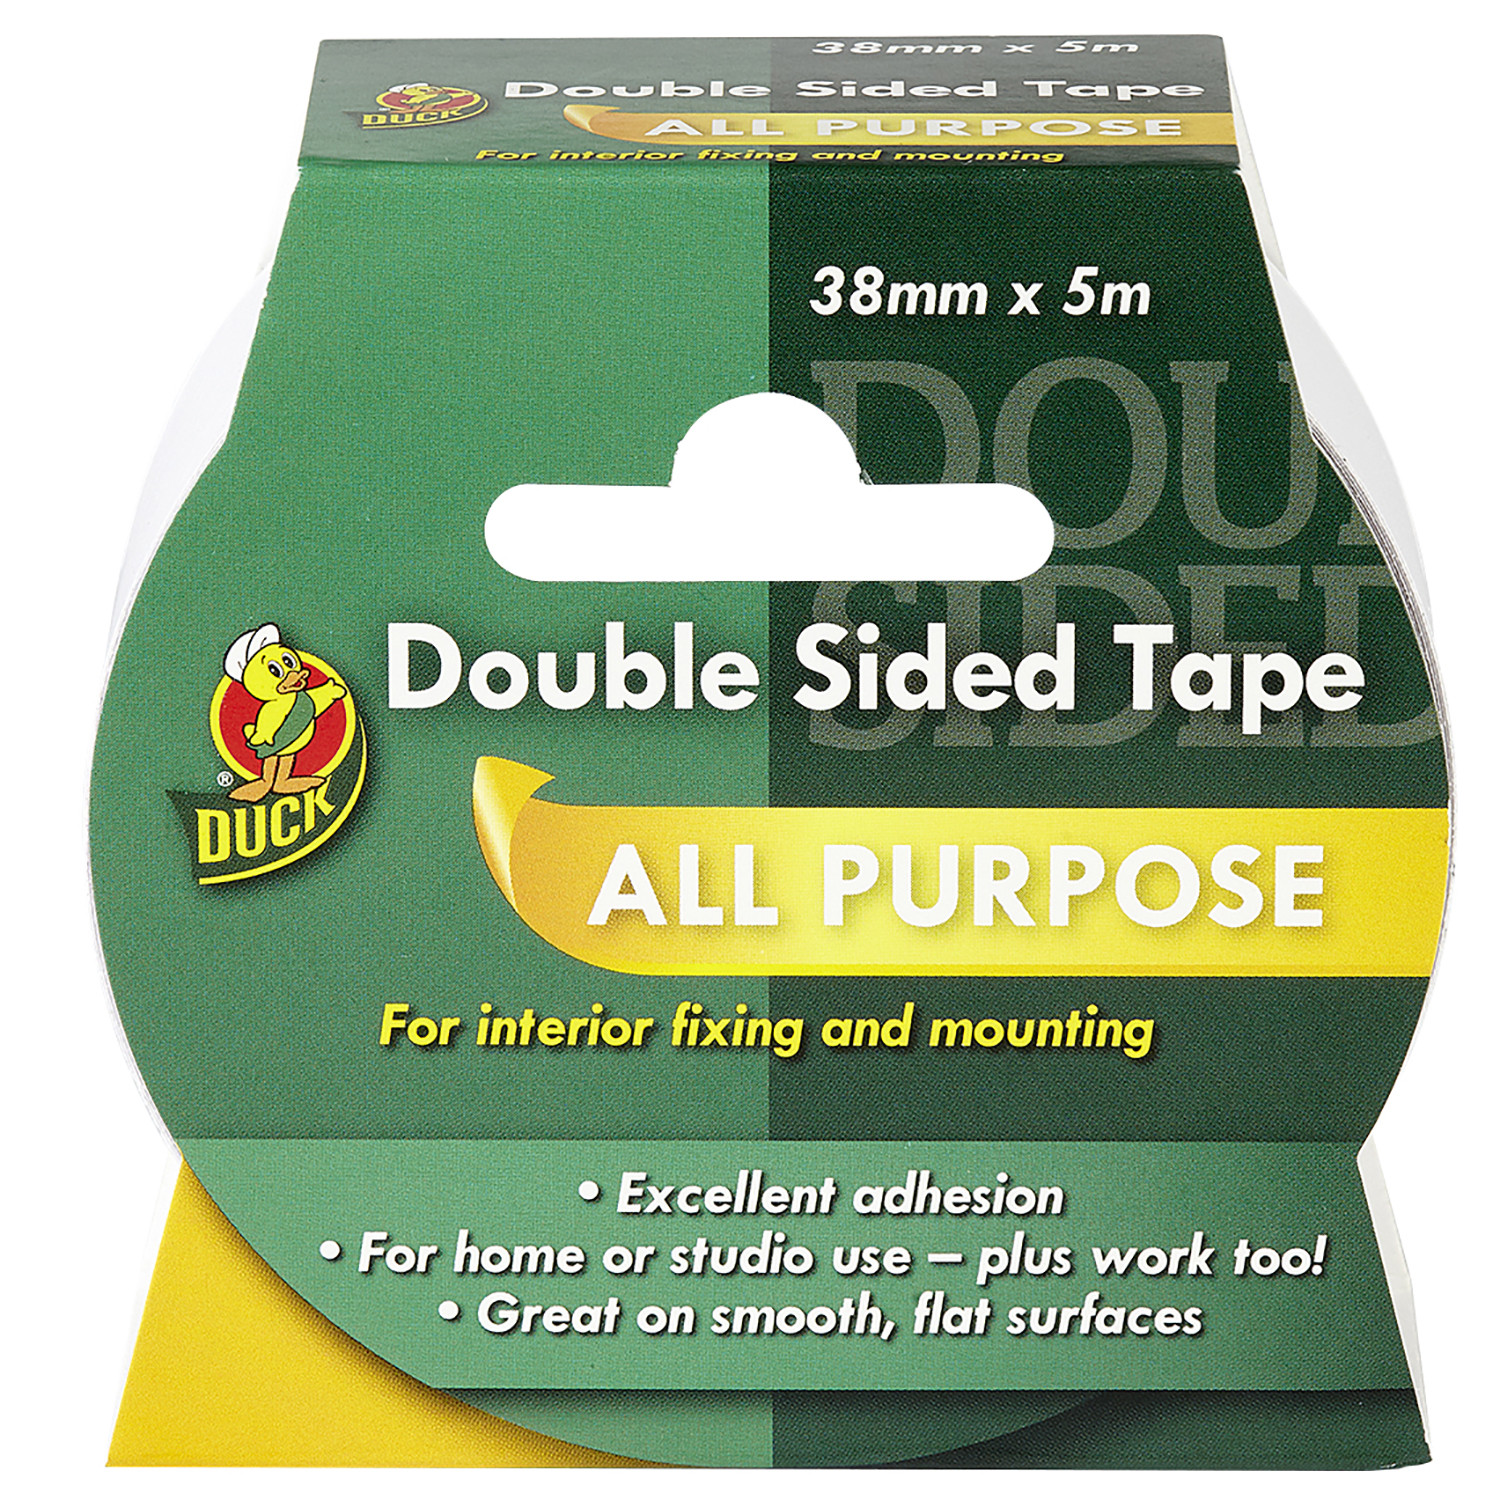 Duck 38mm x 5m Double Sided Tape Image 1